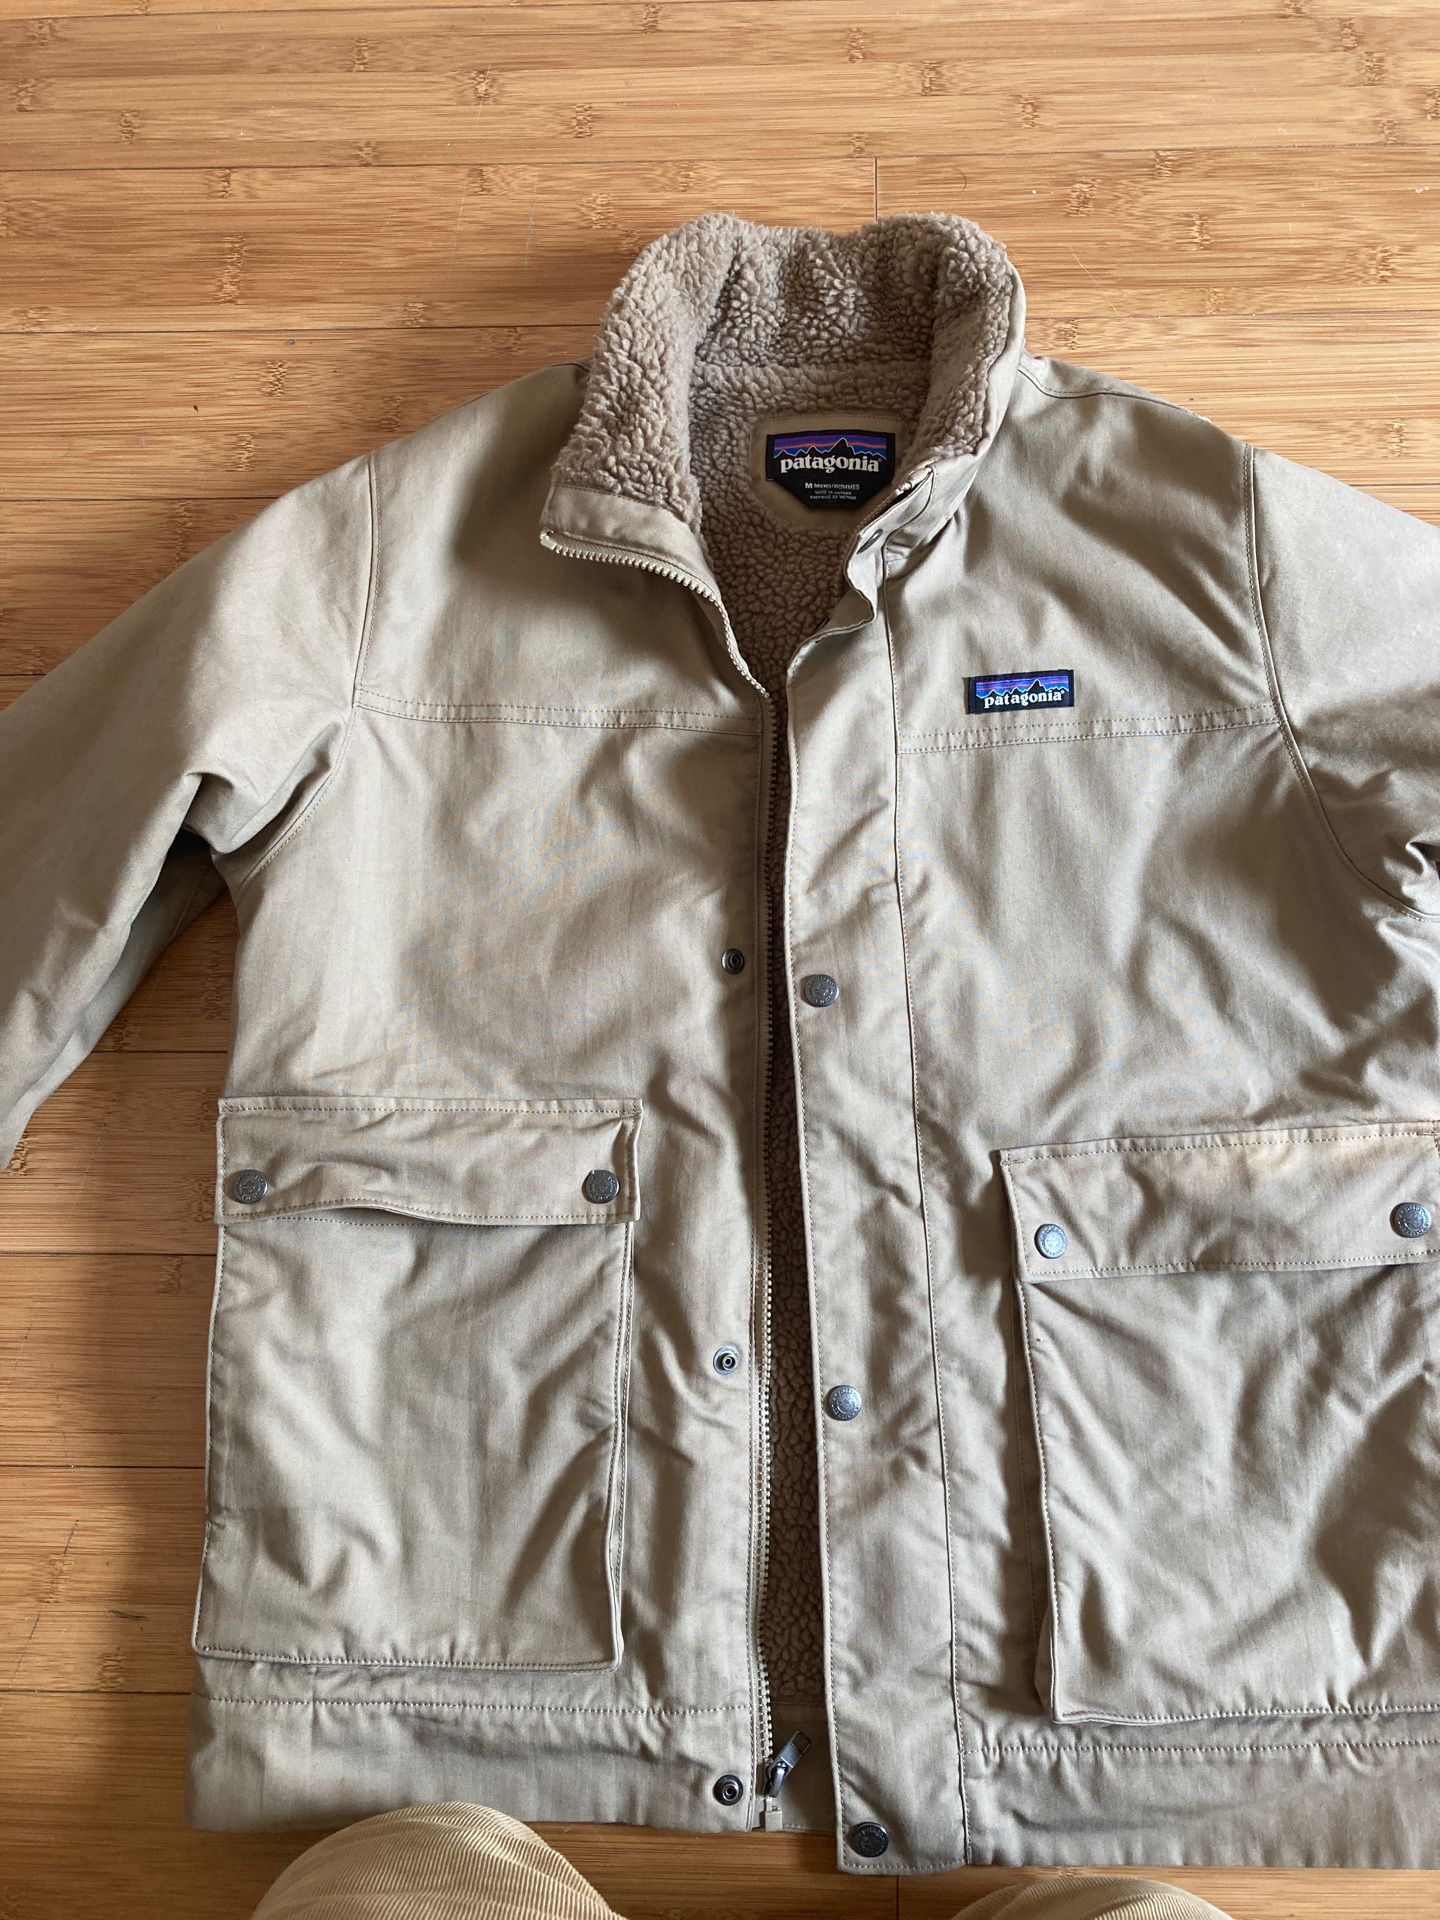 Patagonia sherpa lined Jacket size M